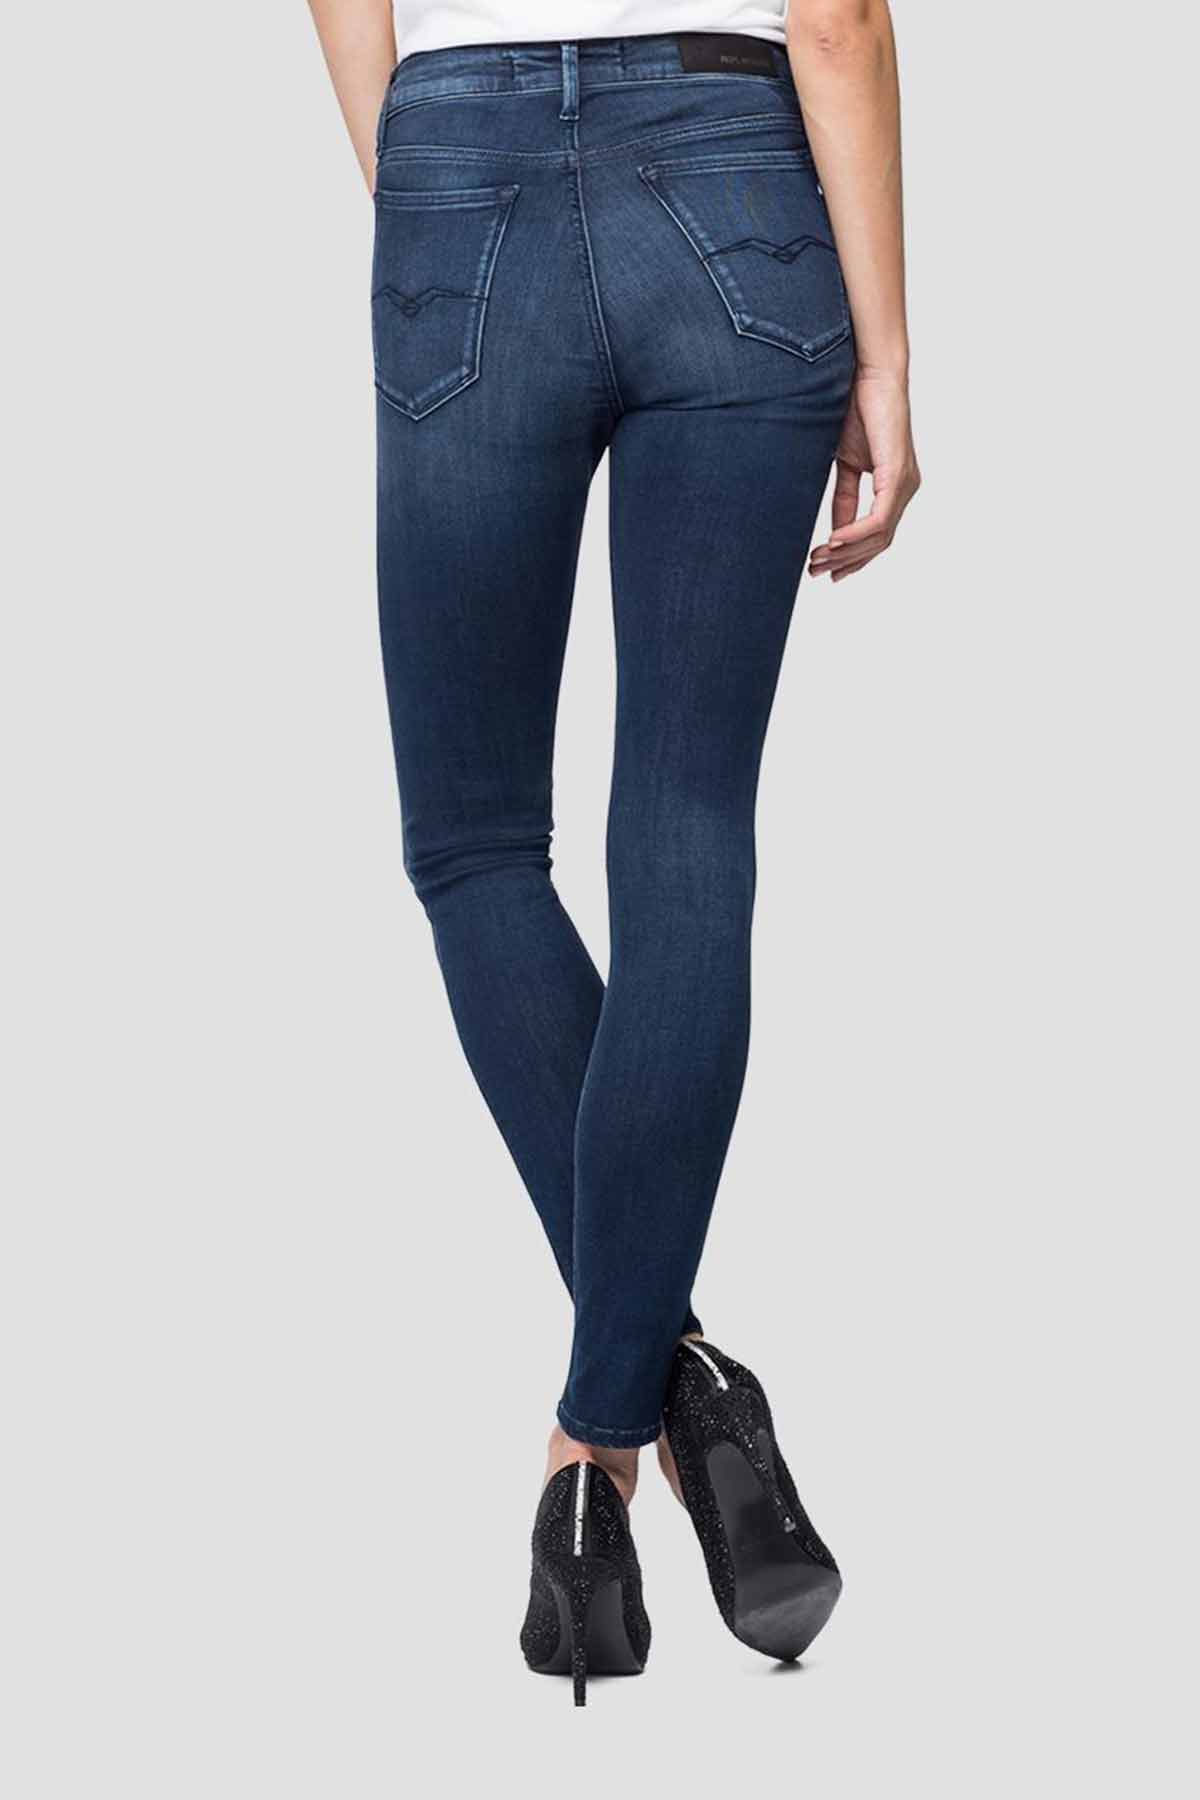 Replay Skinny Fit Luzien Jeans-Libas Trendy Fashion Store